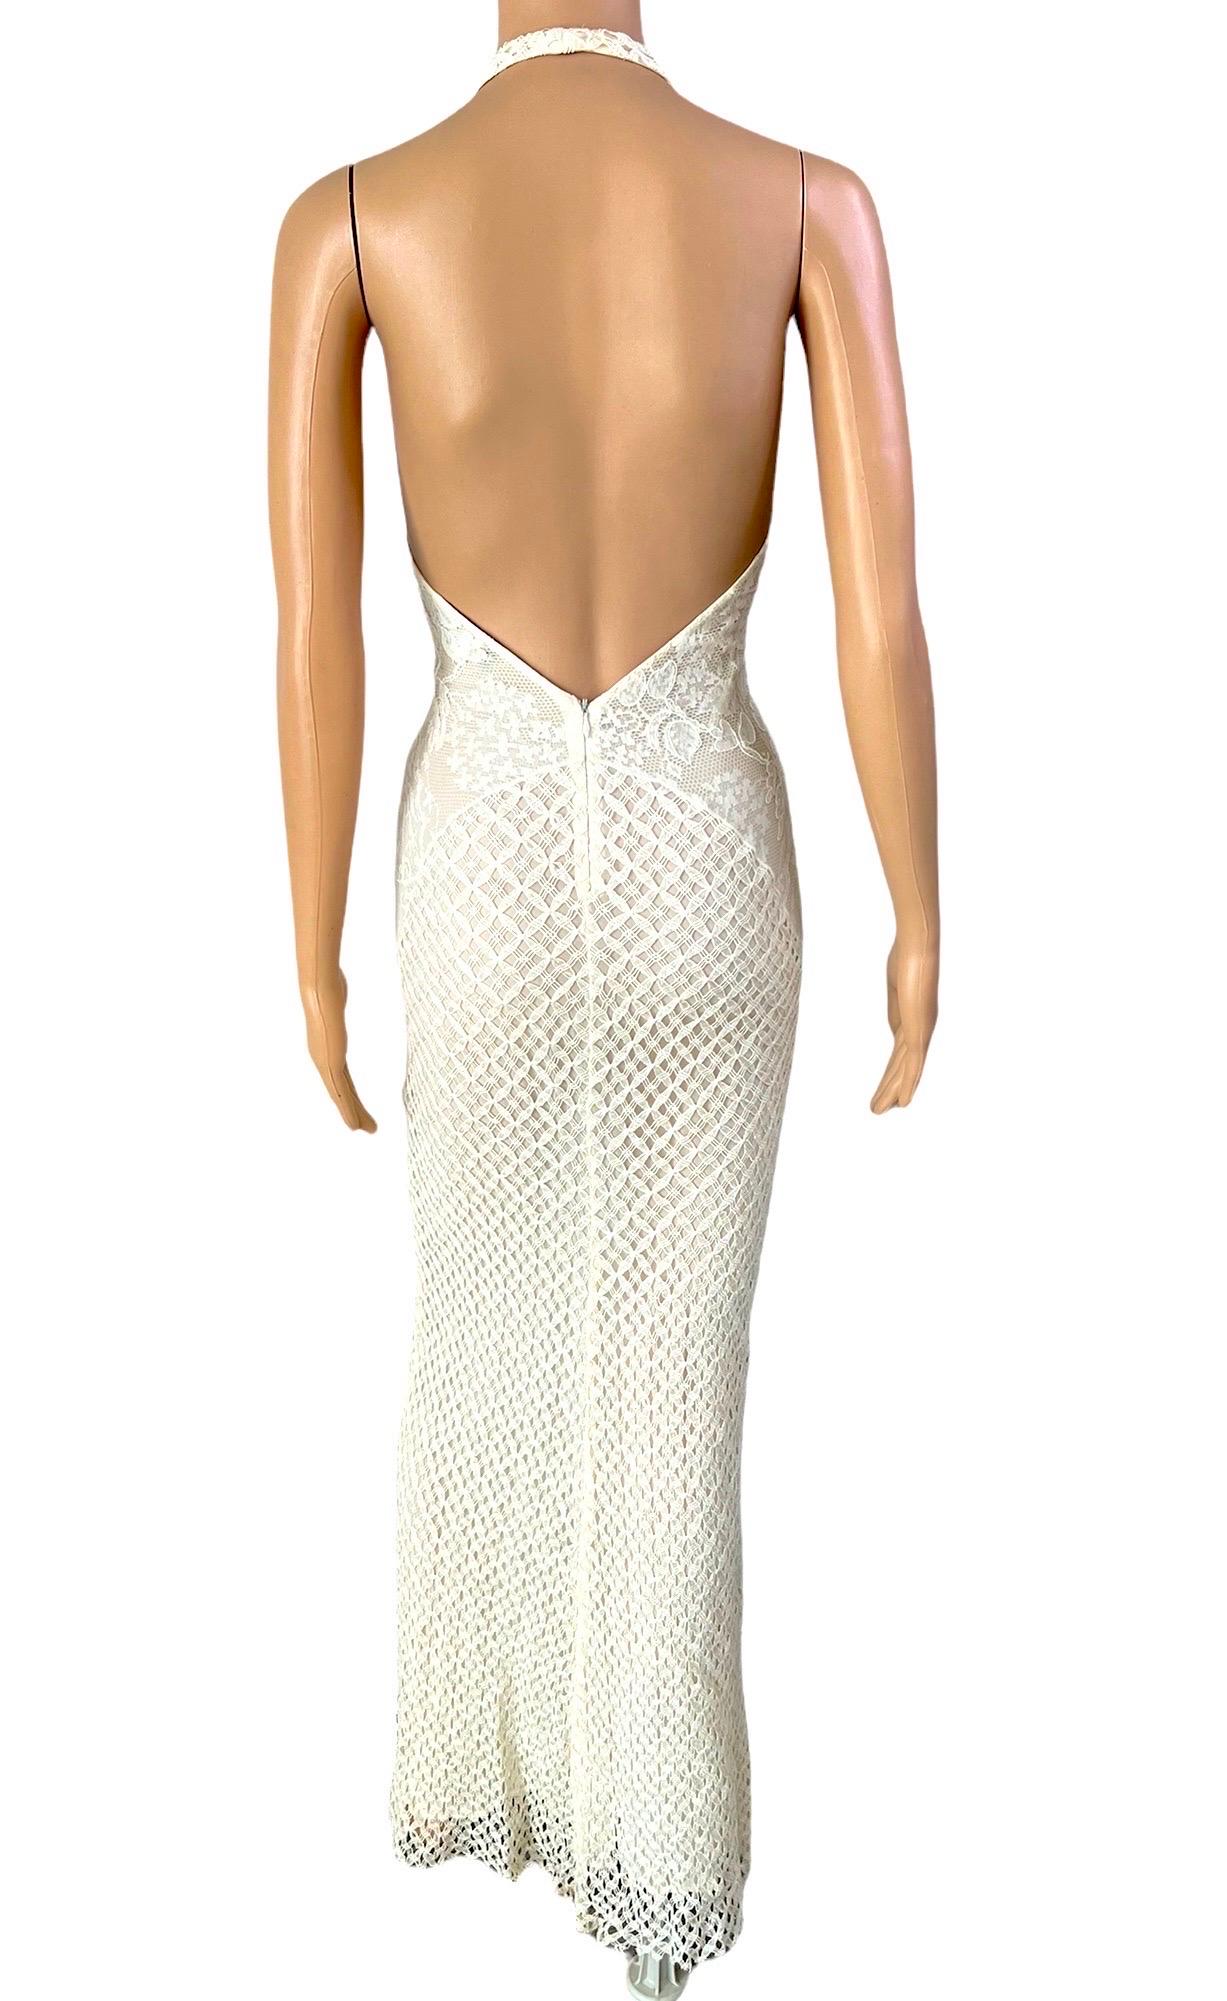 Gianni Versace S/S 2002 Plunging Backless Semi Sheer Lace Knit Ivory Dress Gown 2